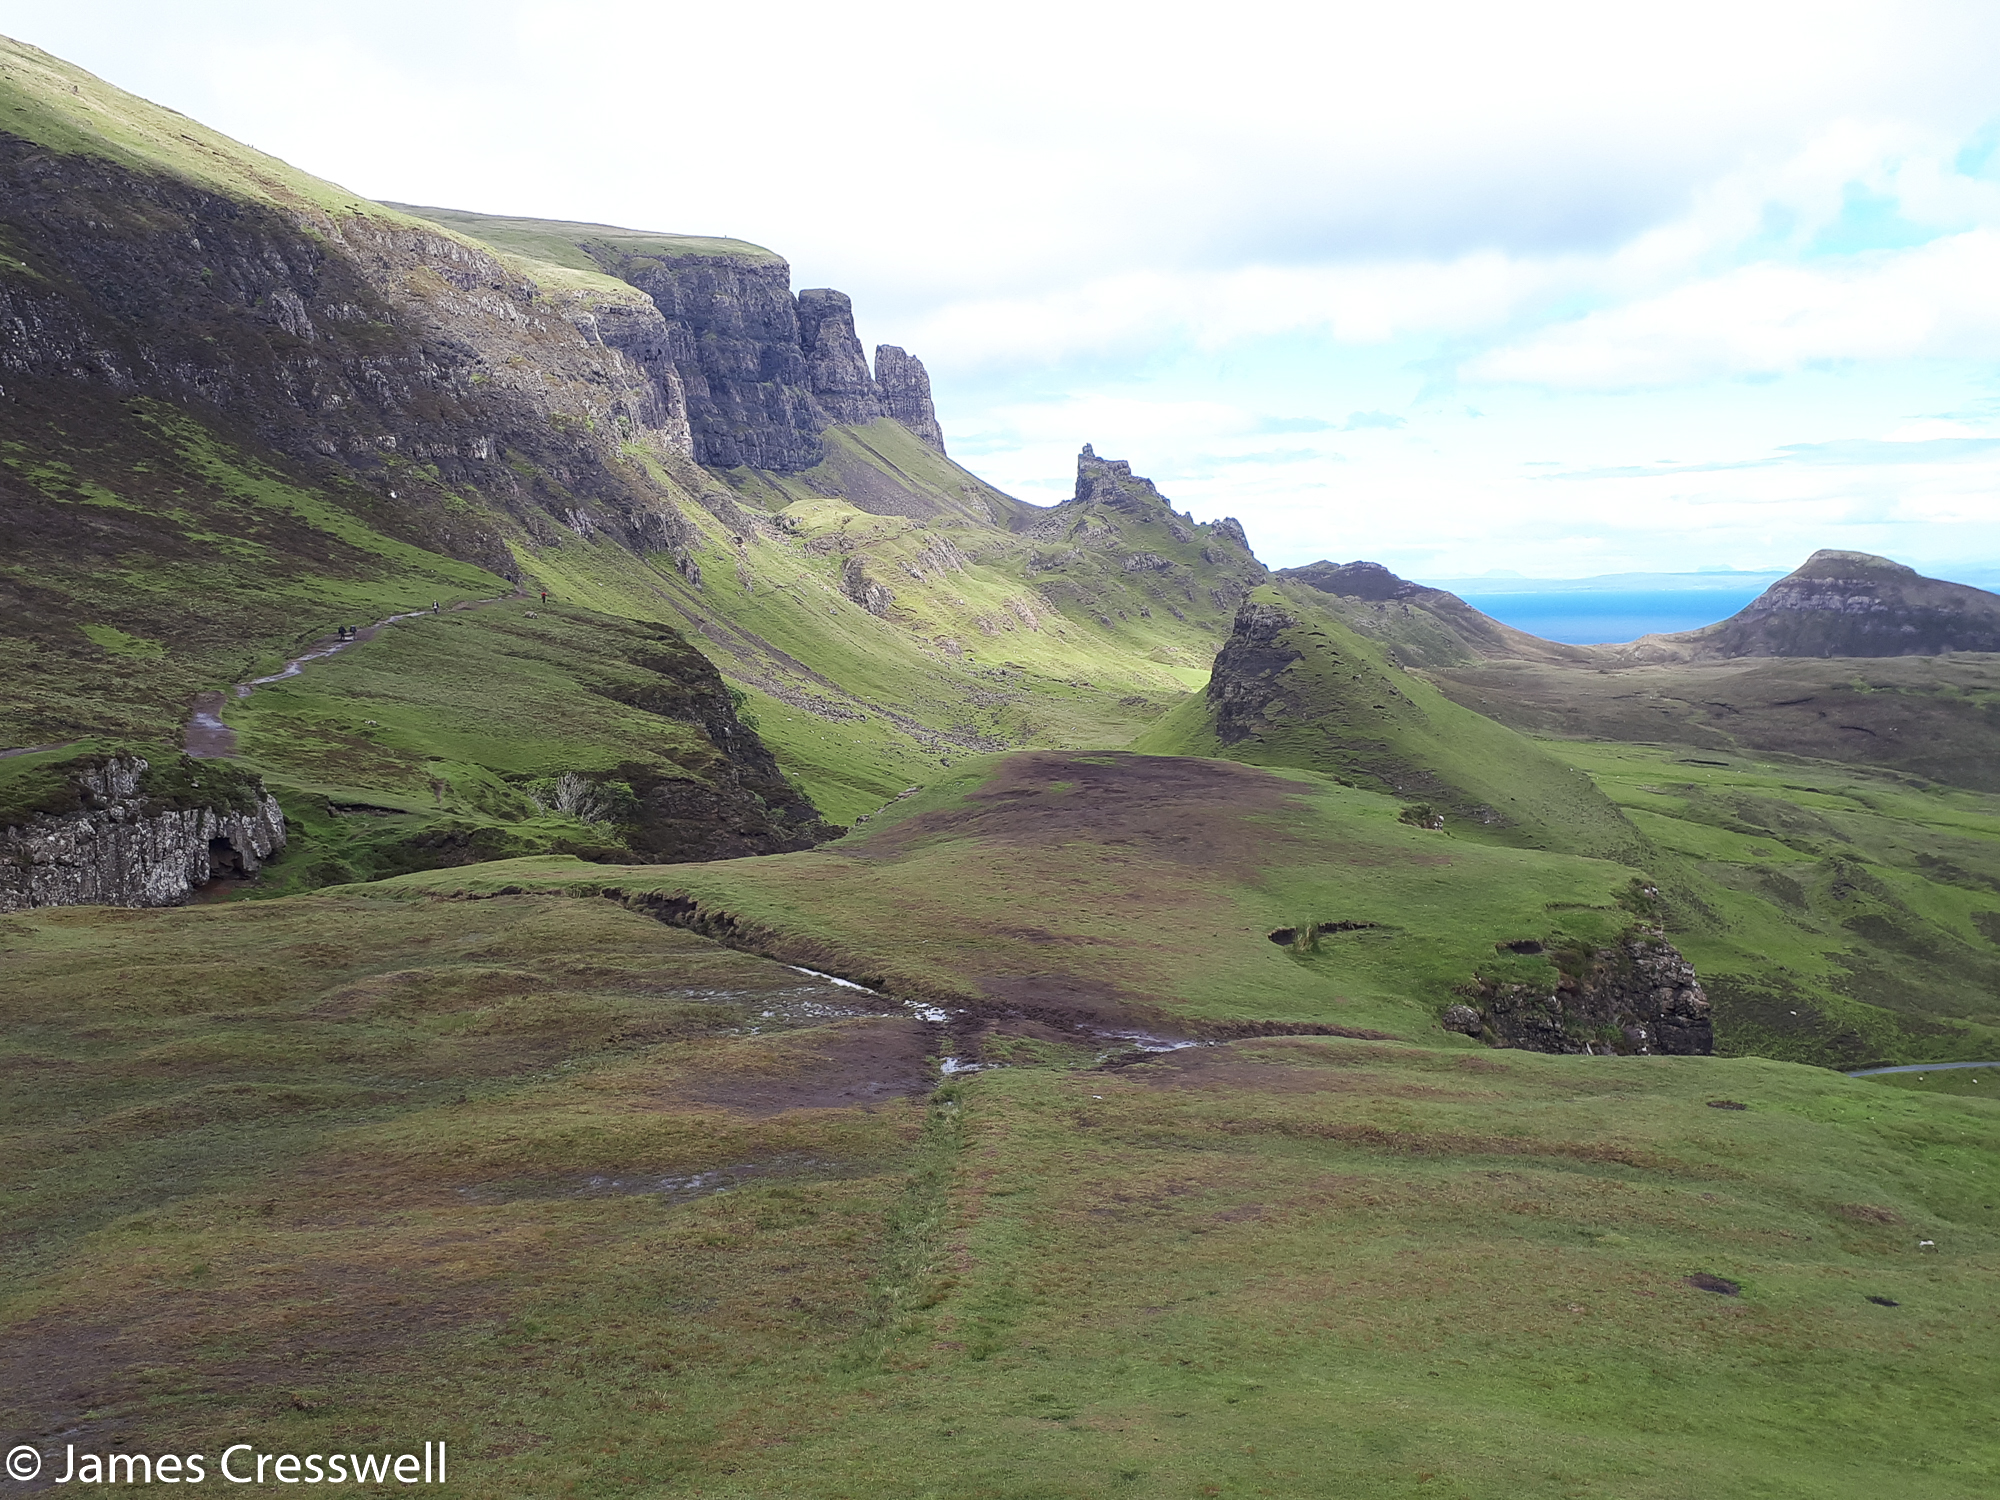 A photograph of rocky pinnicles, the Quiraing and Trotternish landslip, on the Isle of Skye, taken on a GeoWorld Travel Scotland geology trip, tour and holiday